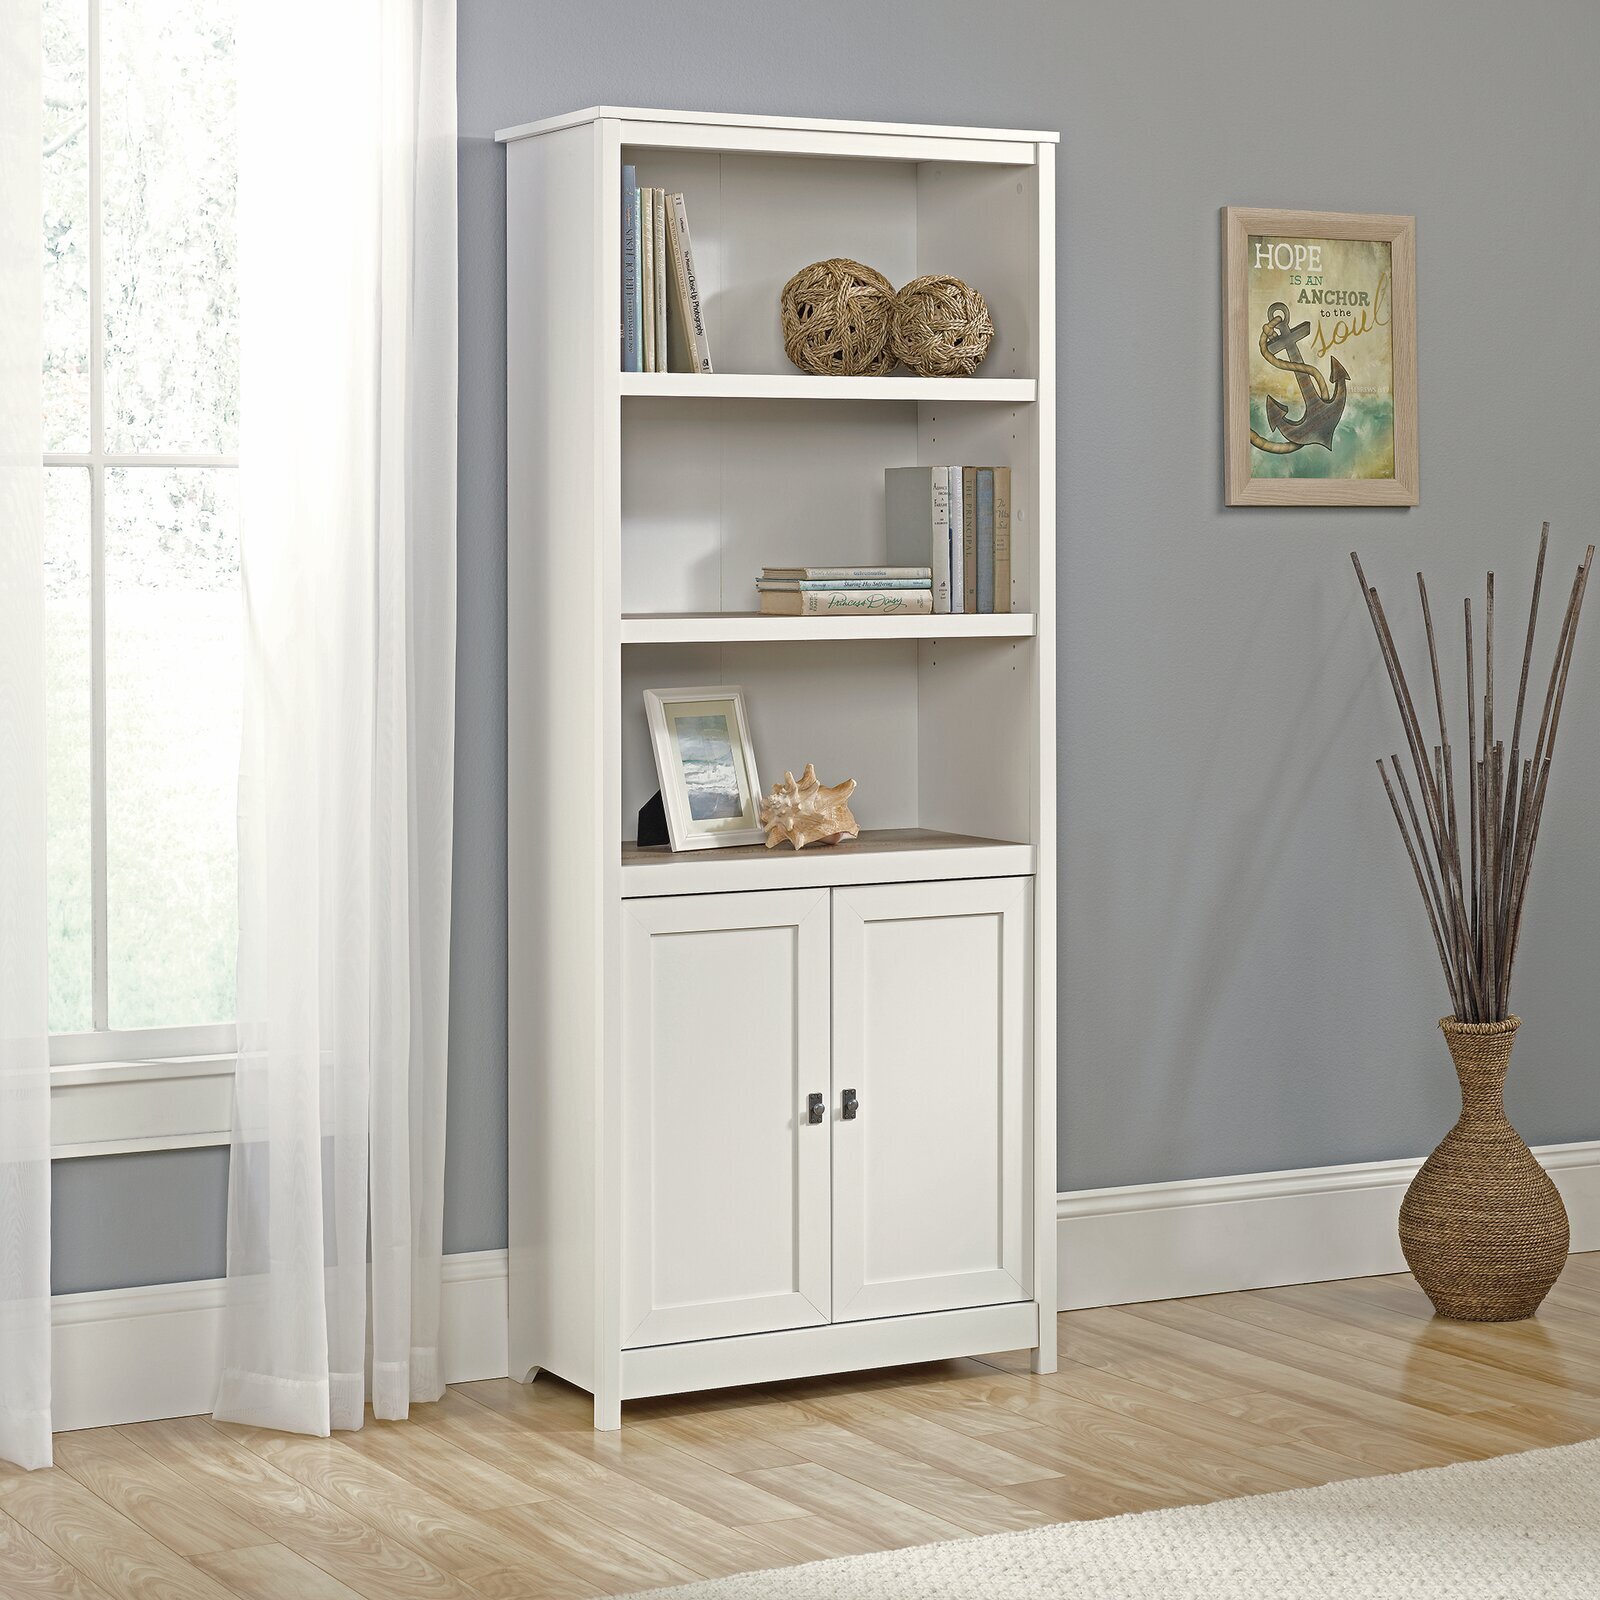 Shaker Style Wooden Bookcase With Lower Doors